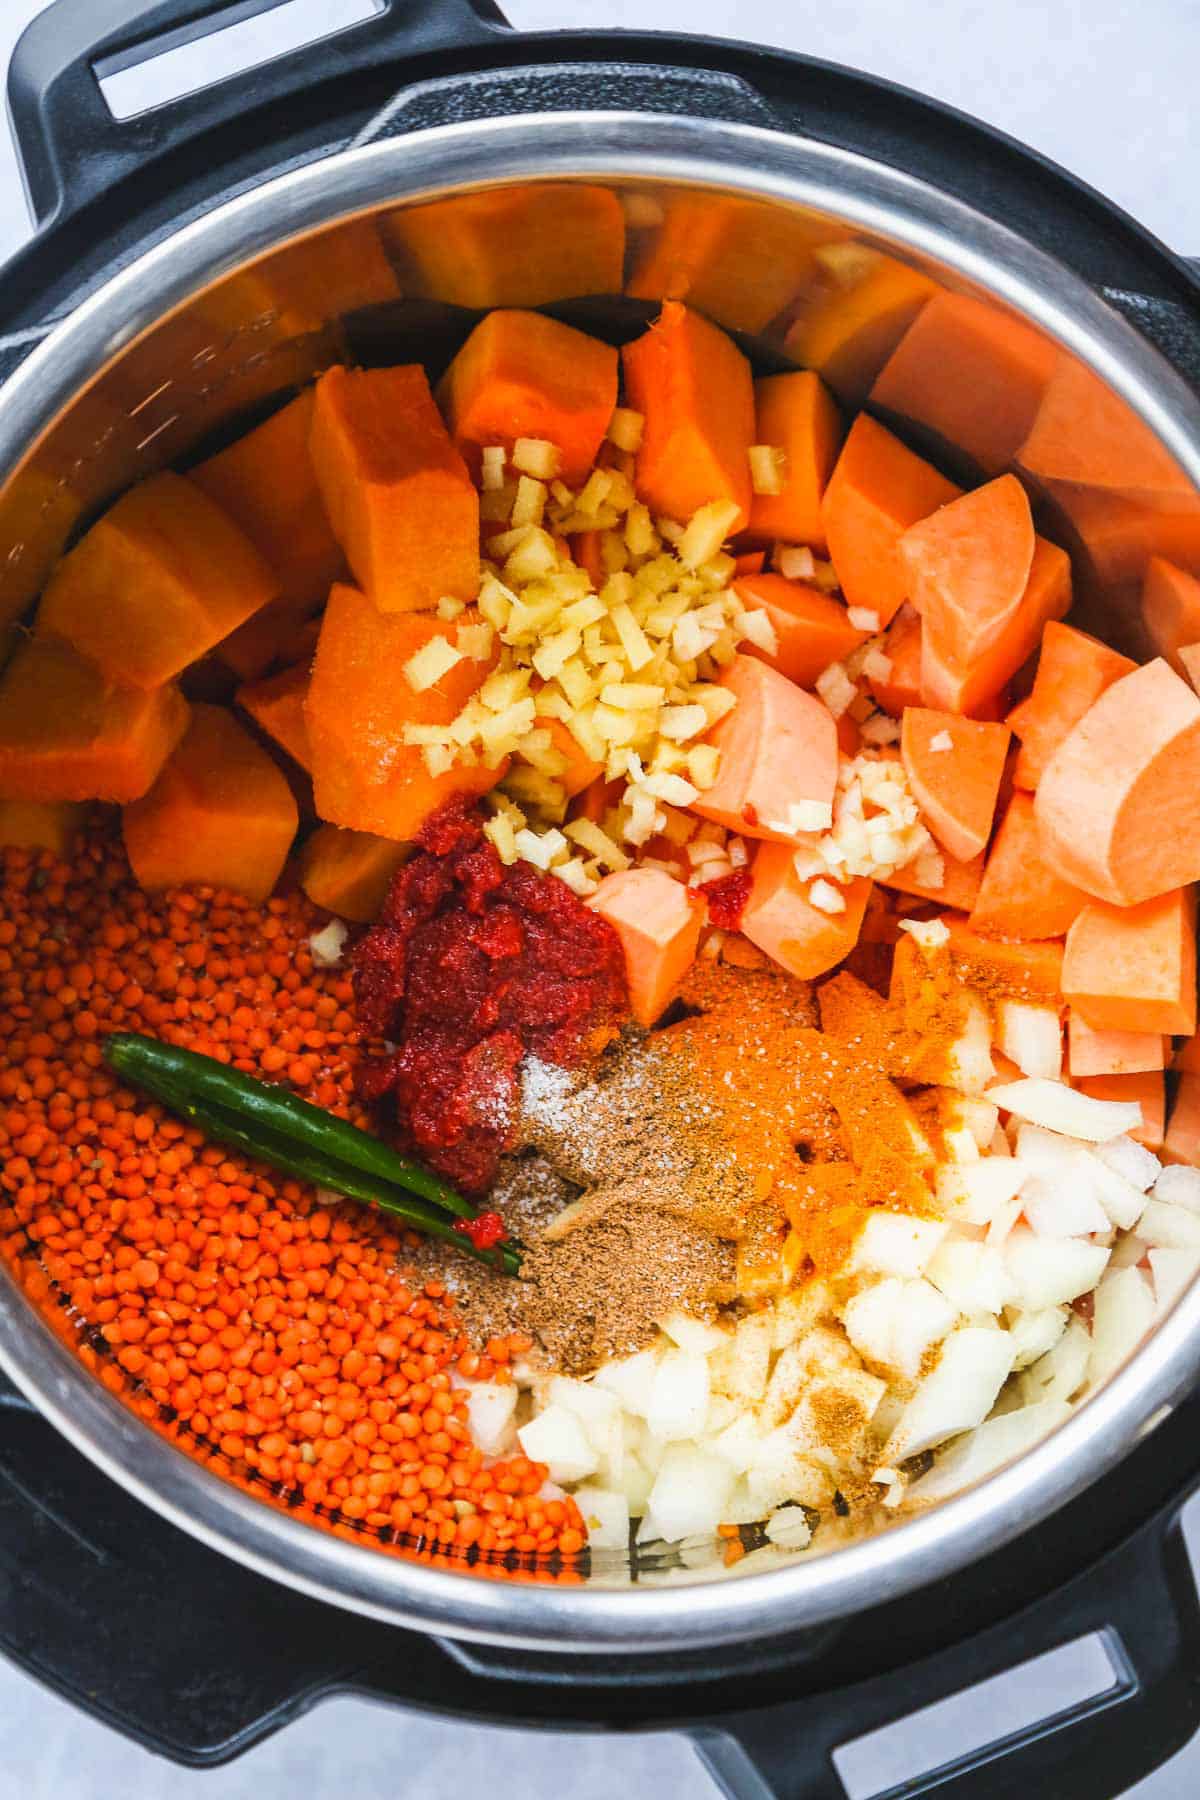 The pumpkin curry ingredients in the instant pot